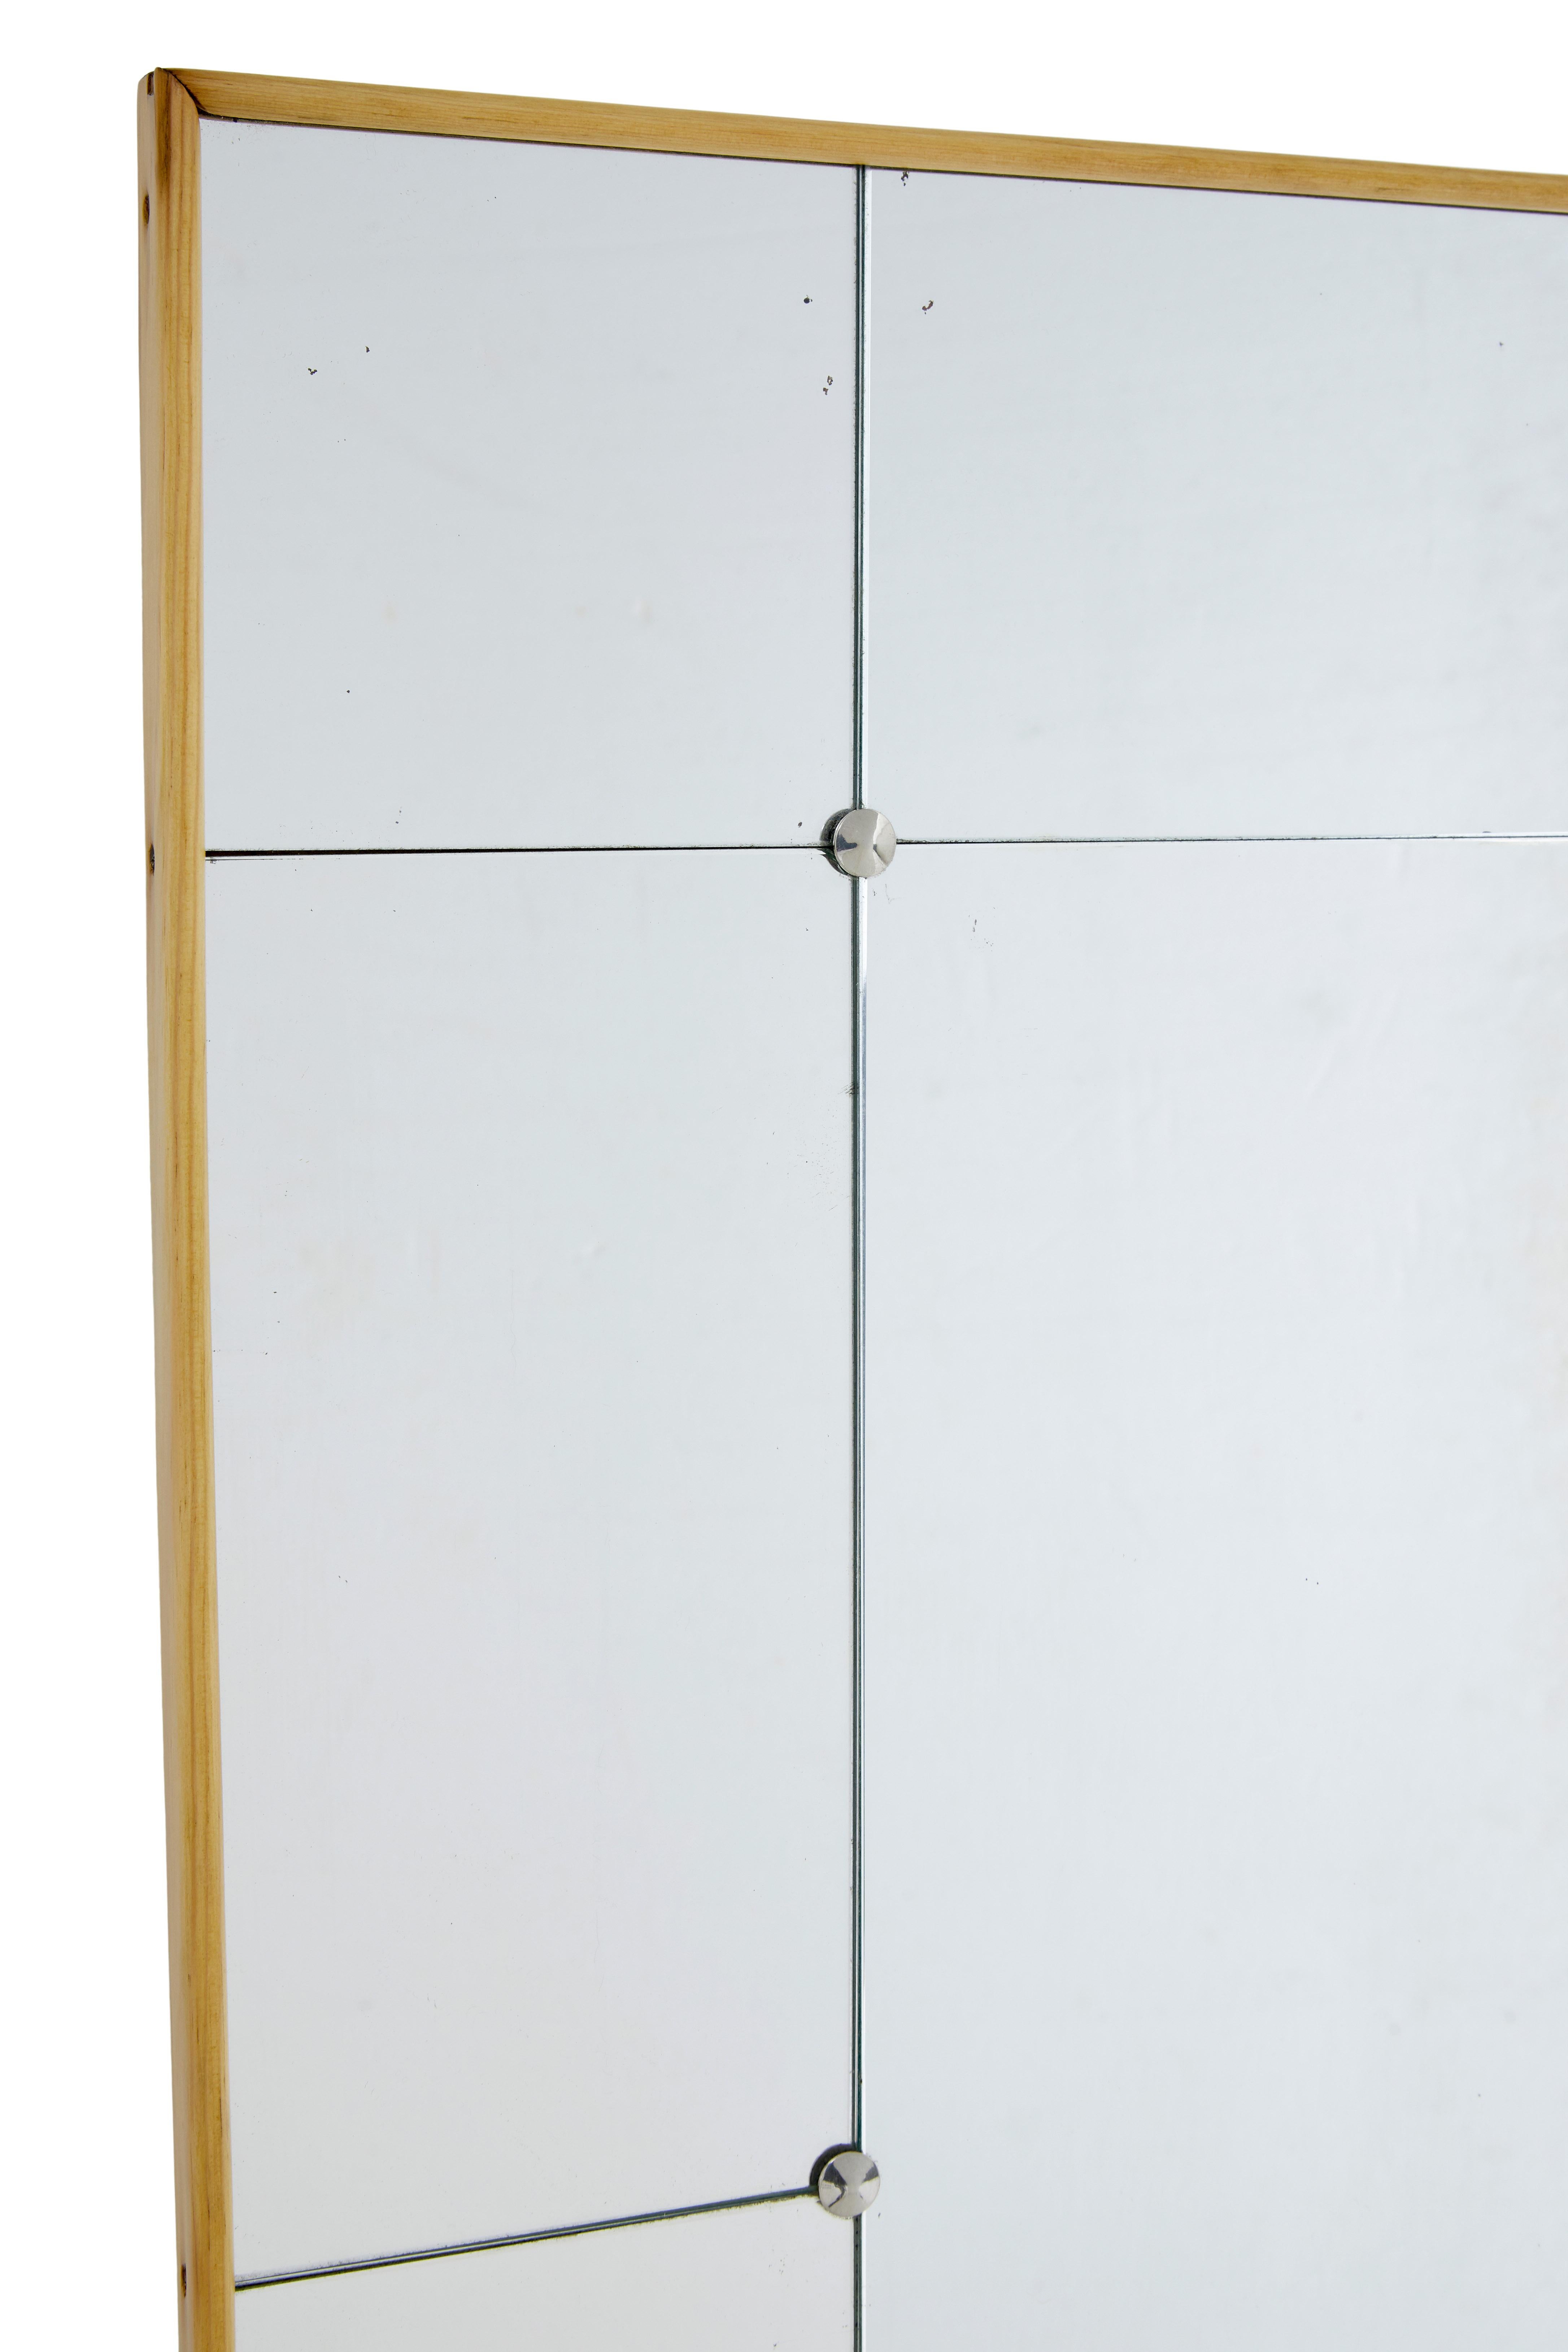 Swedish mid century beech wall mirror circa 1960.

Wall mirror ideal for use in the bedroom or bathroom. Small rectangular central mirror surrounded by further smaller rectangular mirror's, held in place by chromed screw in studs.  Presented in a